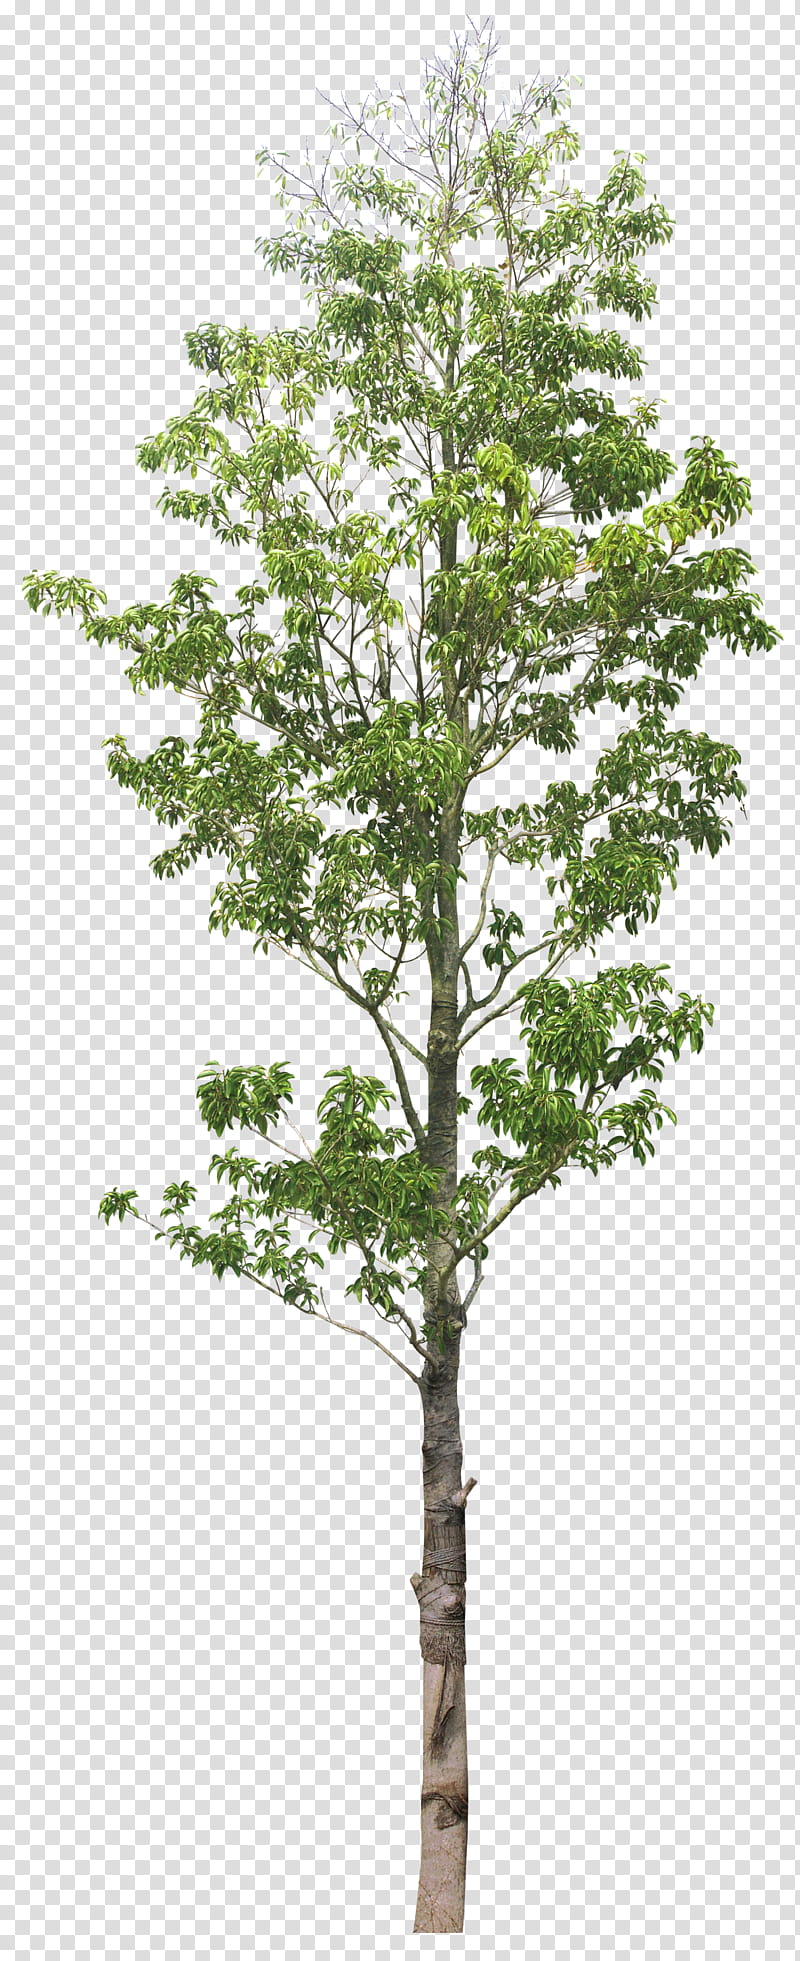 Family Tree, Tilia Platyphyllos, Plants, Lofter, Blog, Architecture, Lindens, Woody Plant transparent background PNG clipart